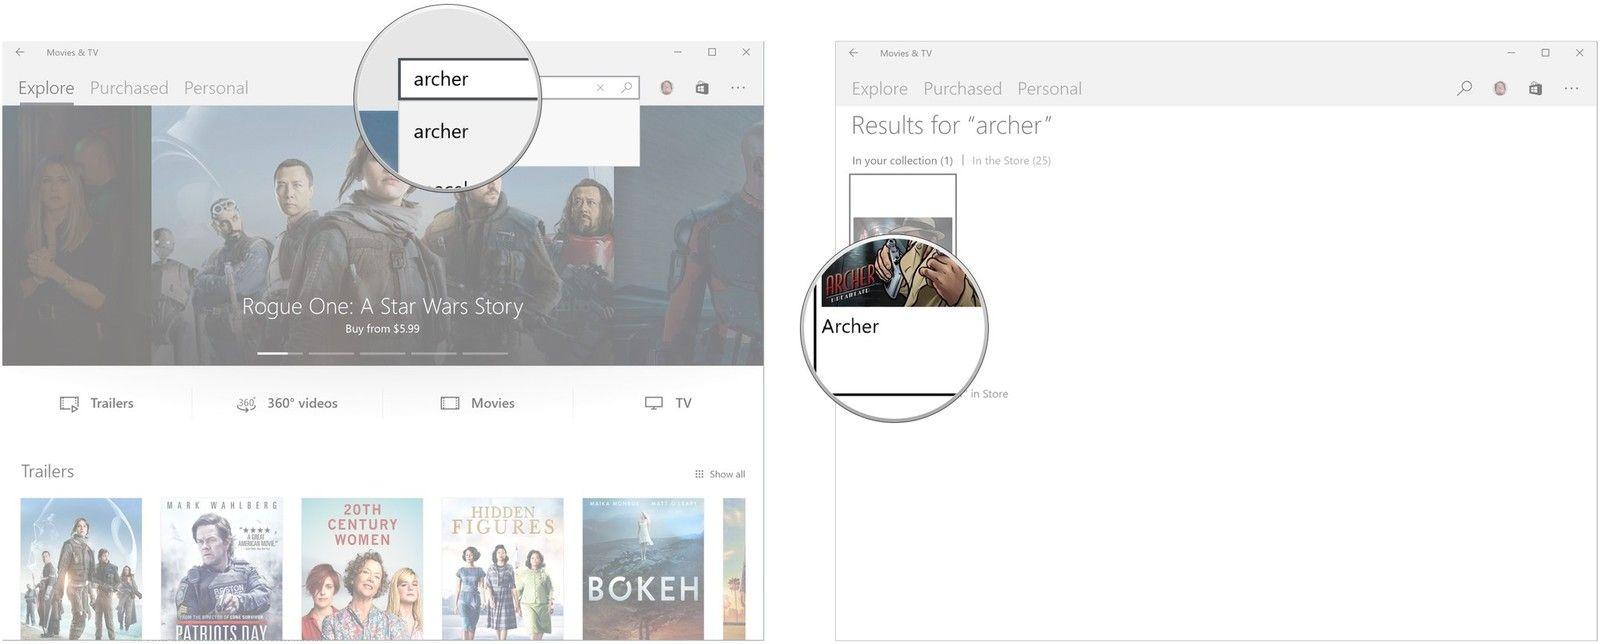 W10 Movies and TV Logo - How to use the Movies & TV app in Windows 10 Creators Update ...